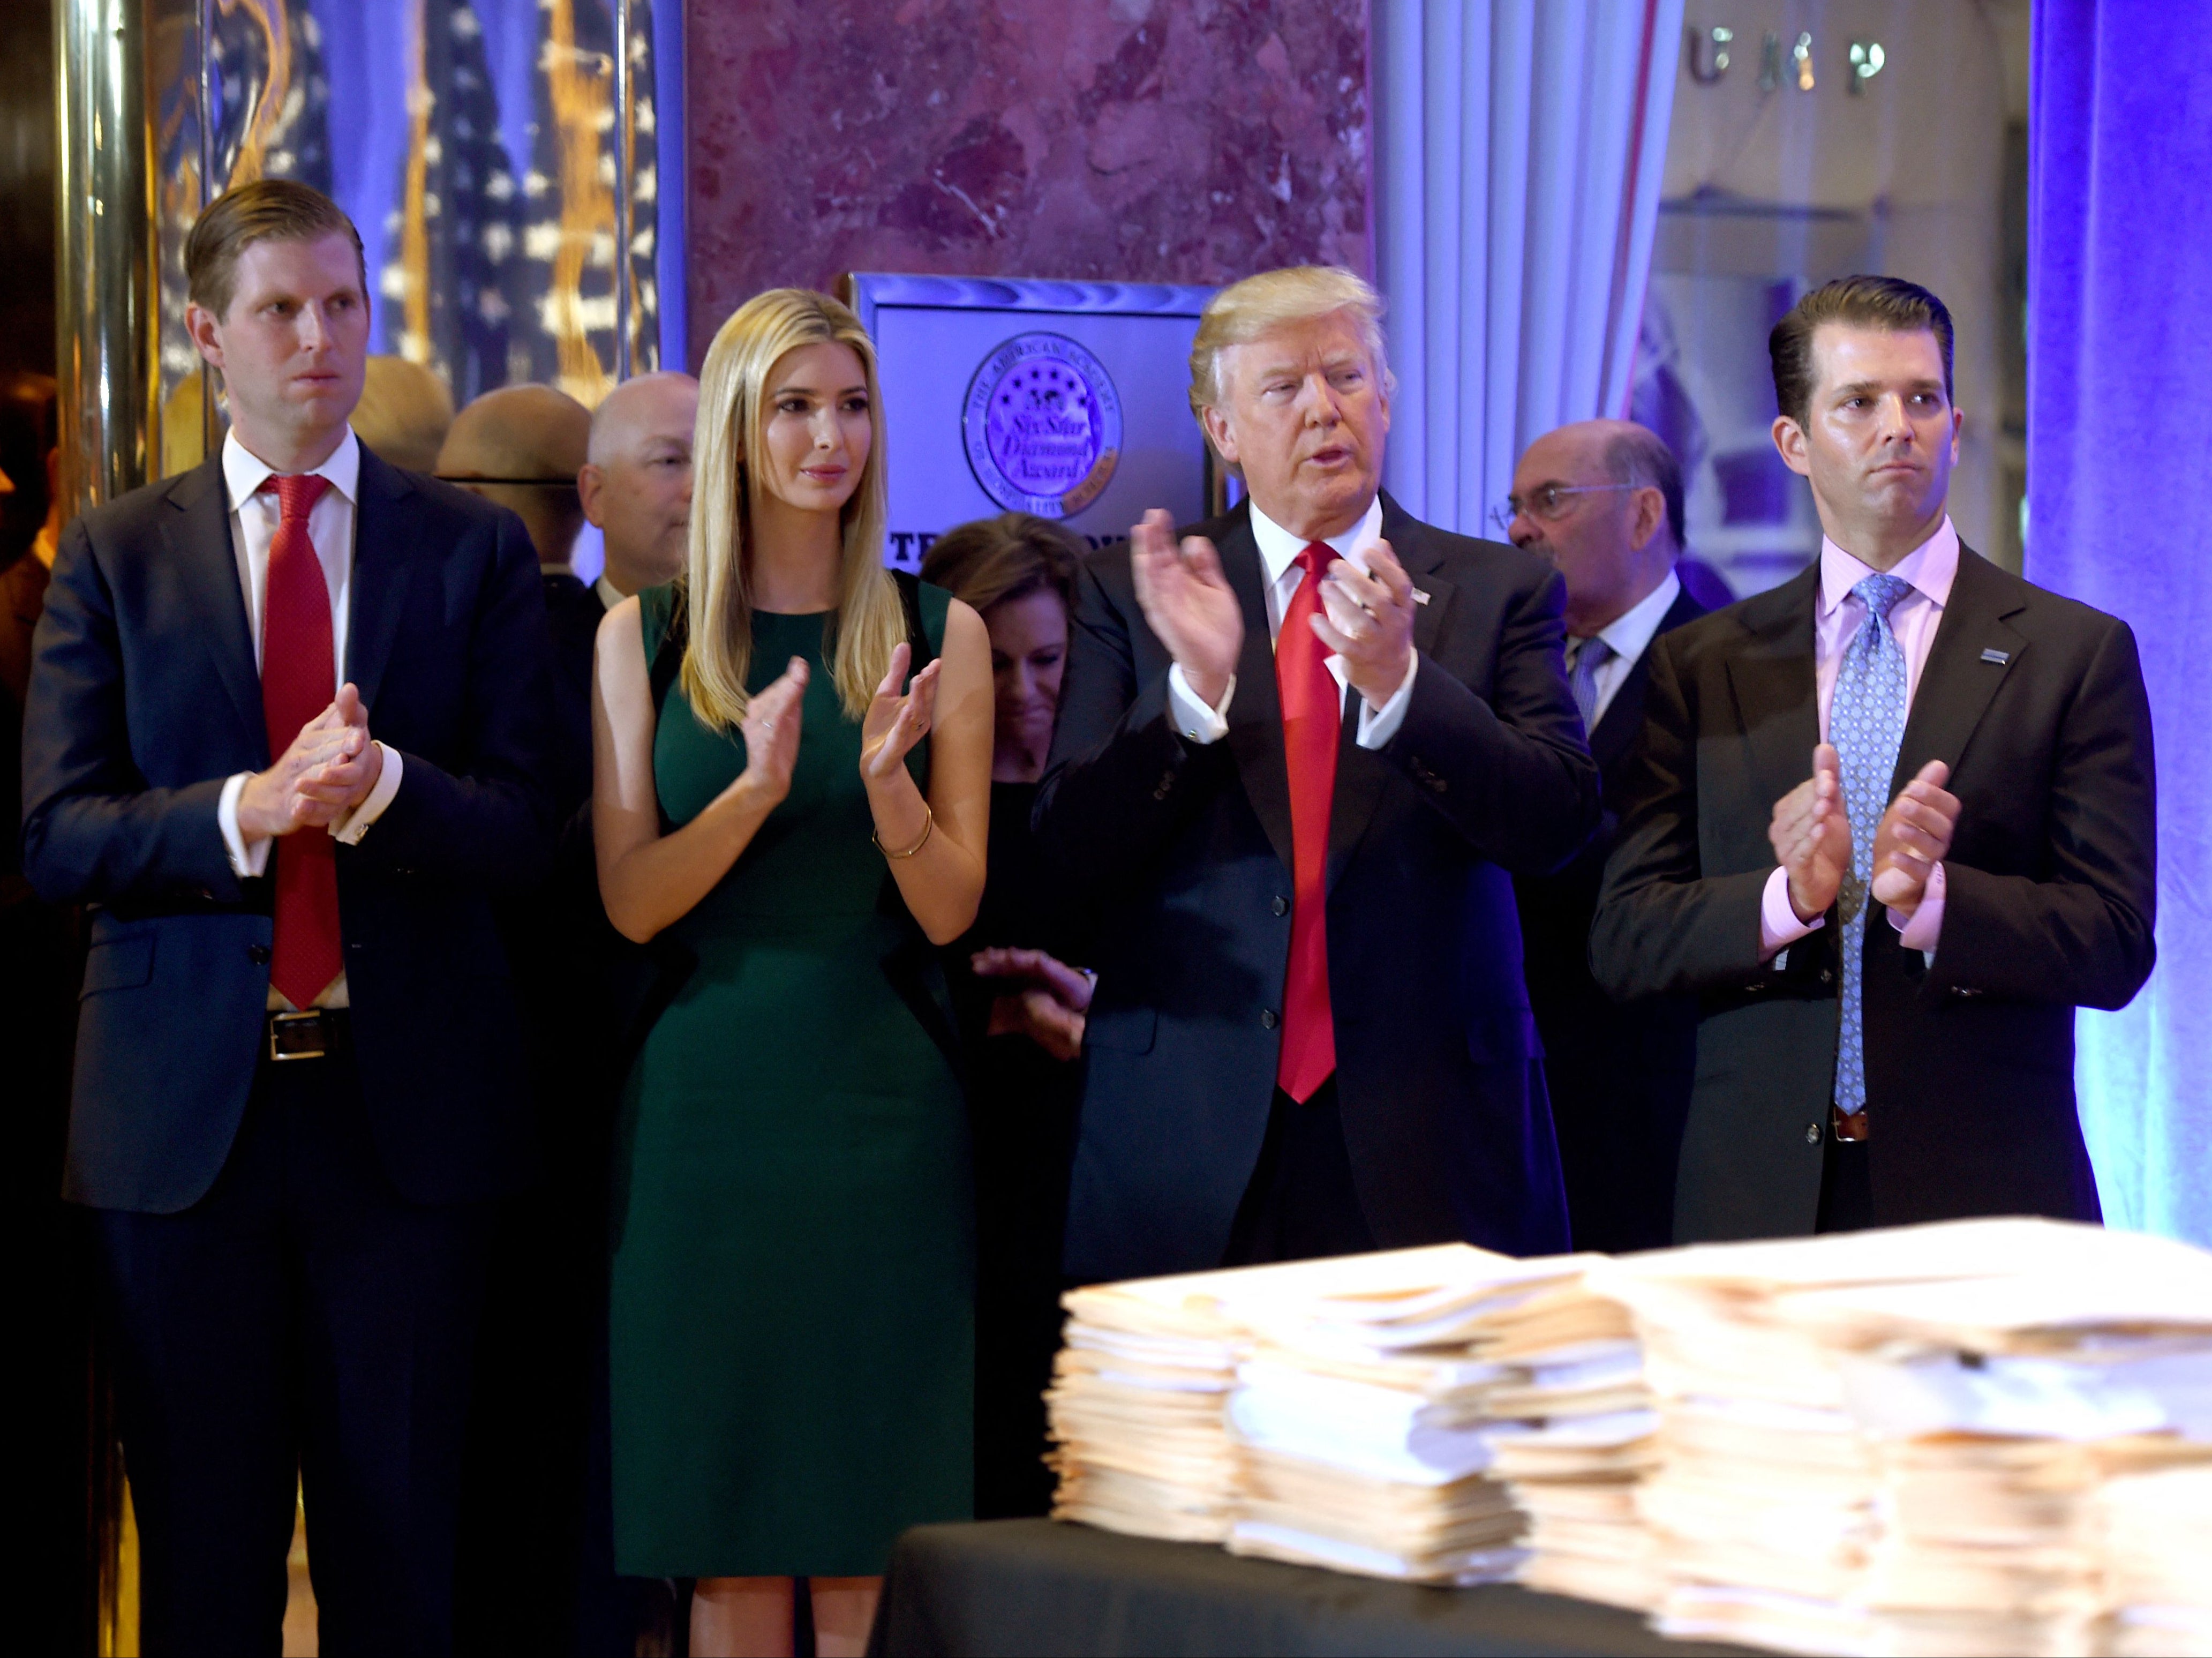 Donald Trump along with his children Eric (L), Ivanka and Donald Jr., arrive for a press conference January 11, 2017 at Trump Tower in New York